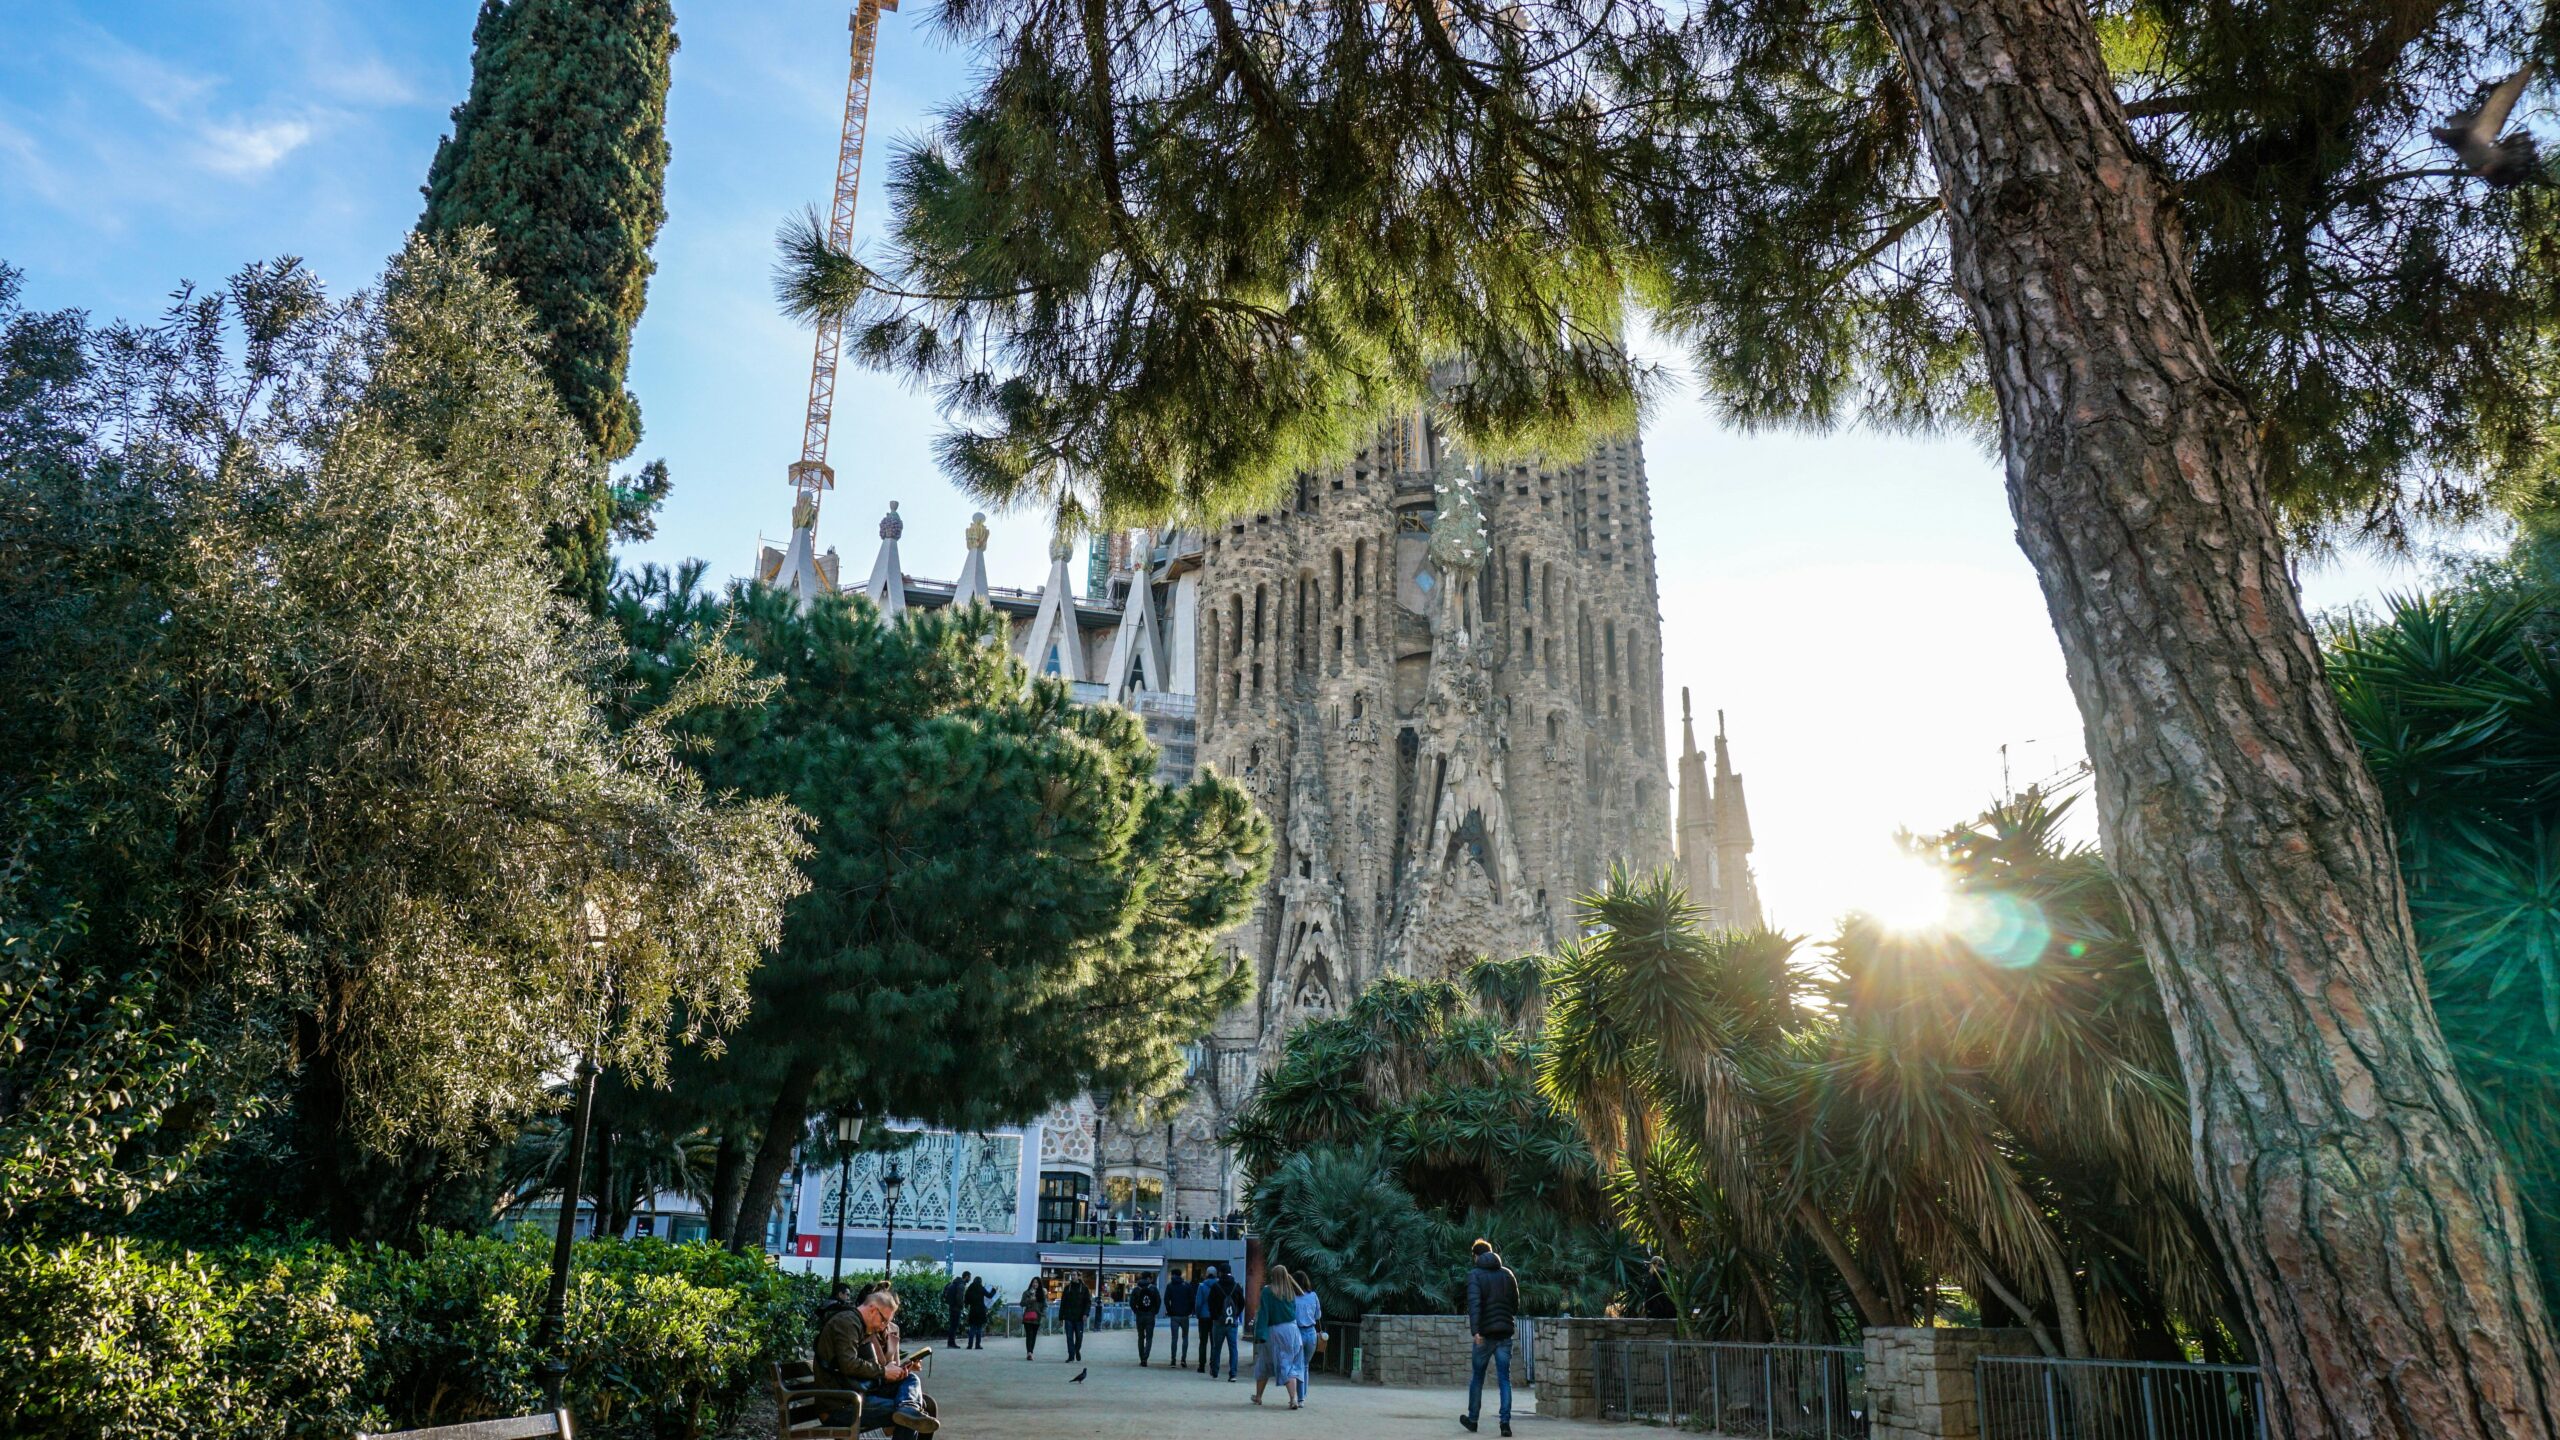 Sunlight filters through the trees at a park in Barcelona, with the iconic Sagrada Família in the background. Visitors stroll along the pathways, enjoying the serene atmosphere and the architectural marvels during the Summer Solstice celebrations.